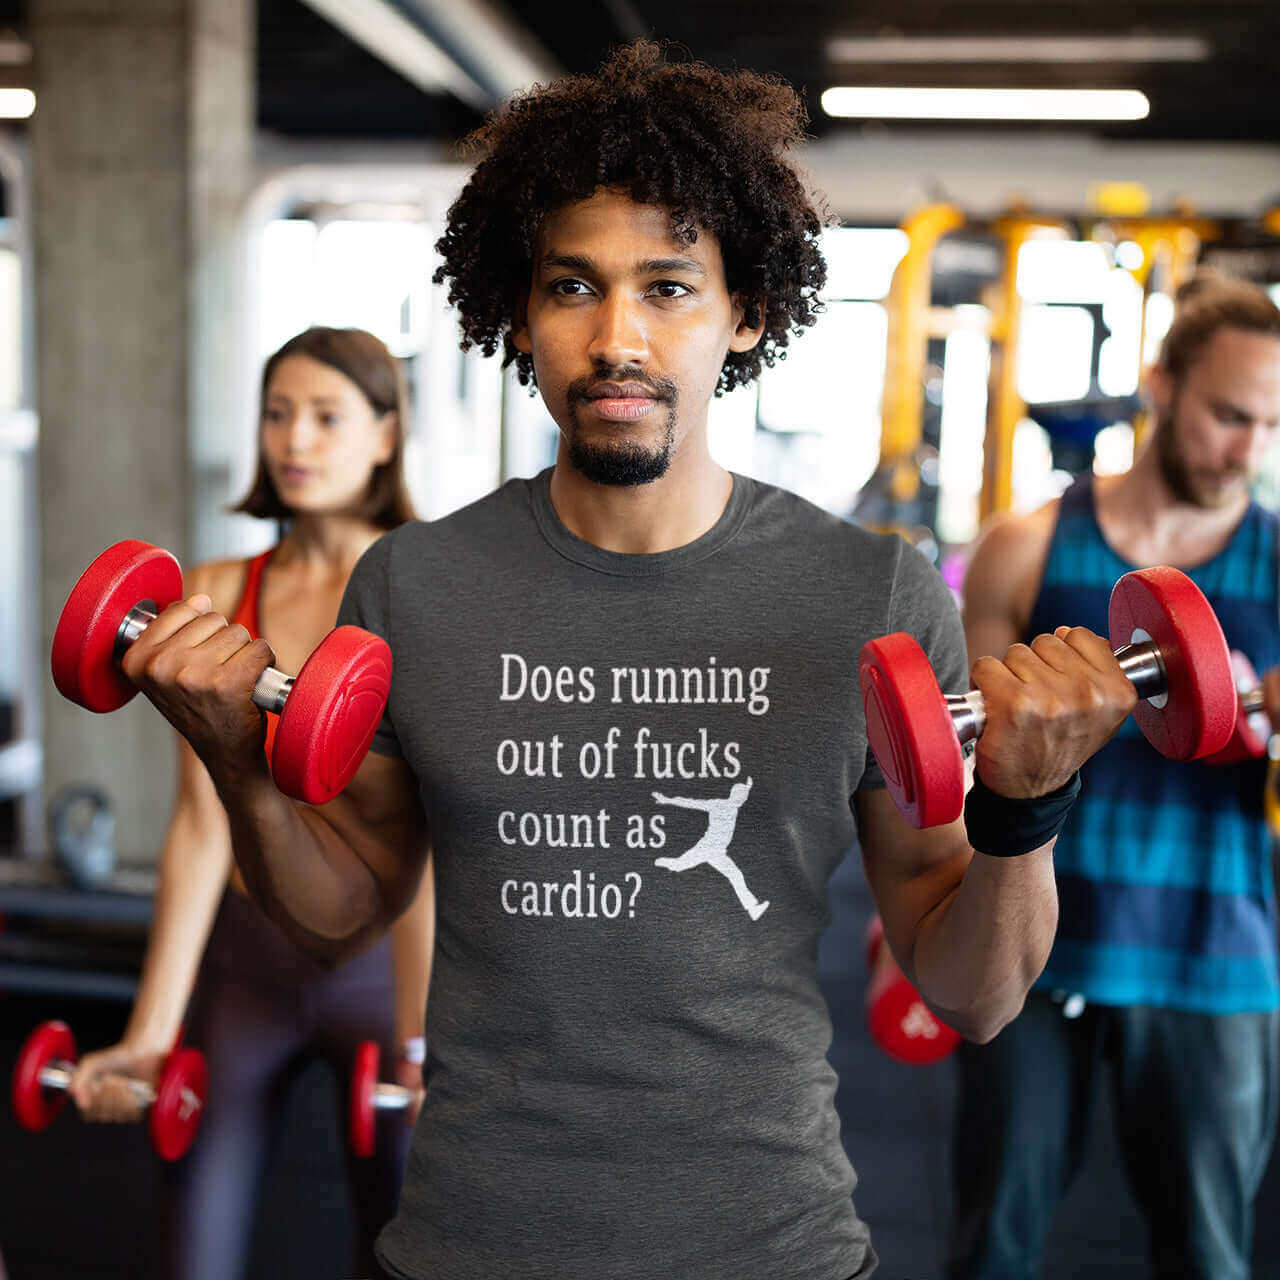 Man in a gym wearing a dark heather t-shirt with a silhouette image of a running person with the phrase Does running out of fucks count as cardio question mark printed on the front.